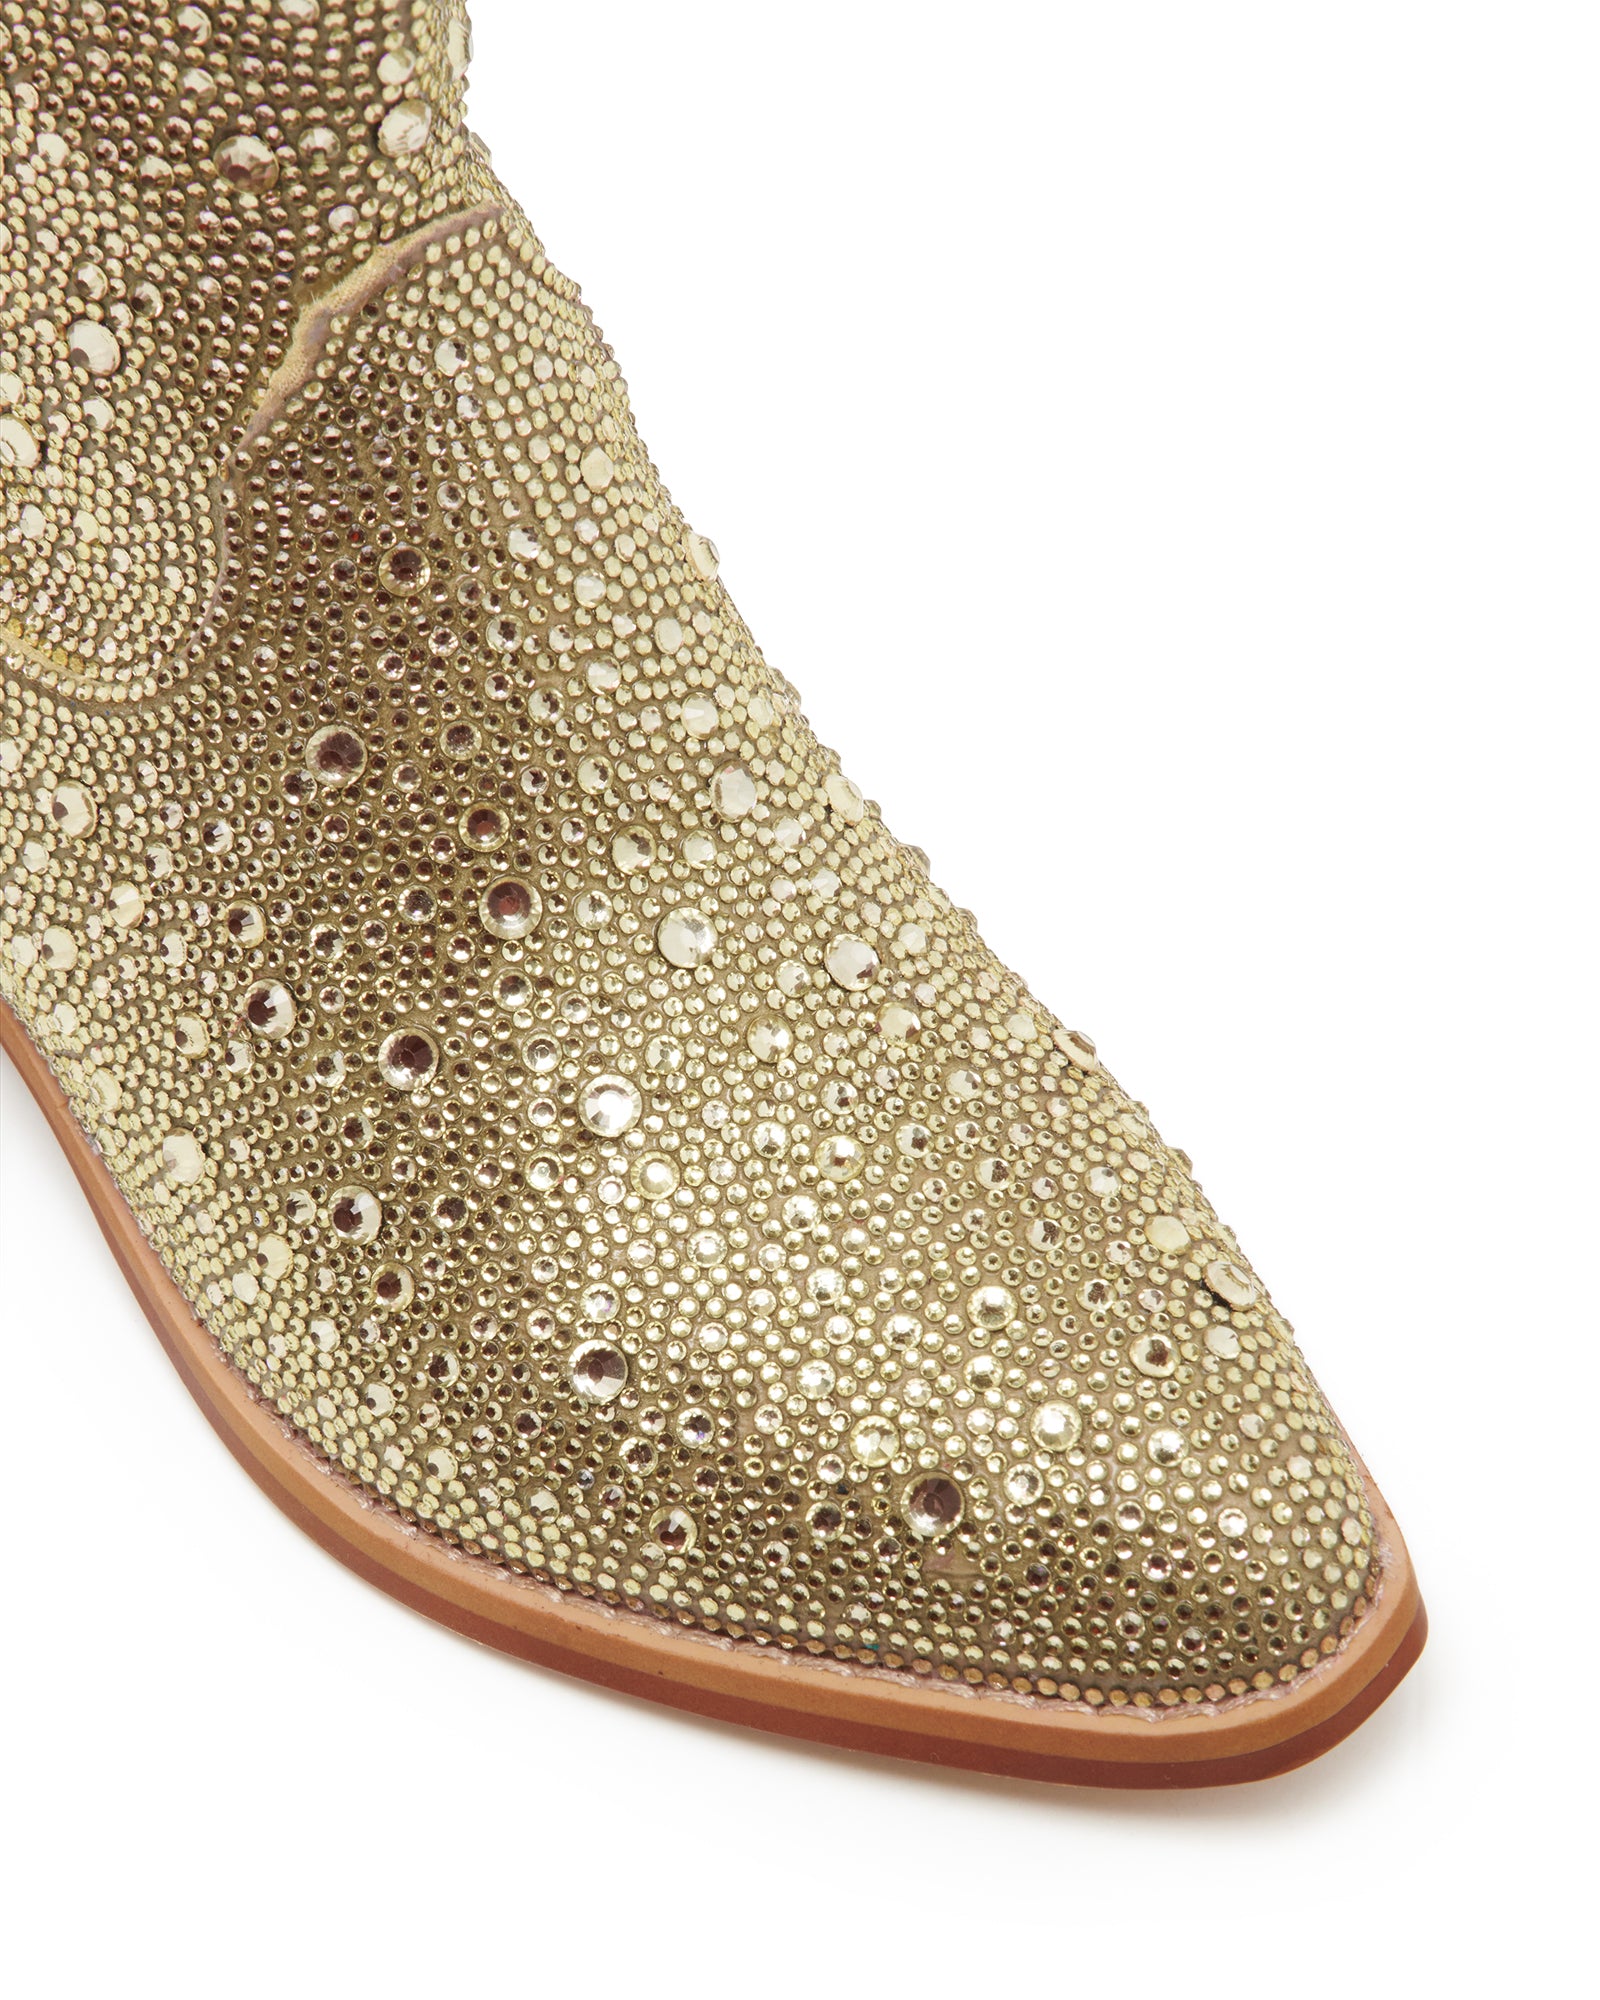 Therapy Shoes Majesty Soft Gold Rhinestones | Women's Boots | Western | Cowboy | Tall